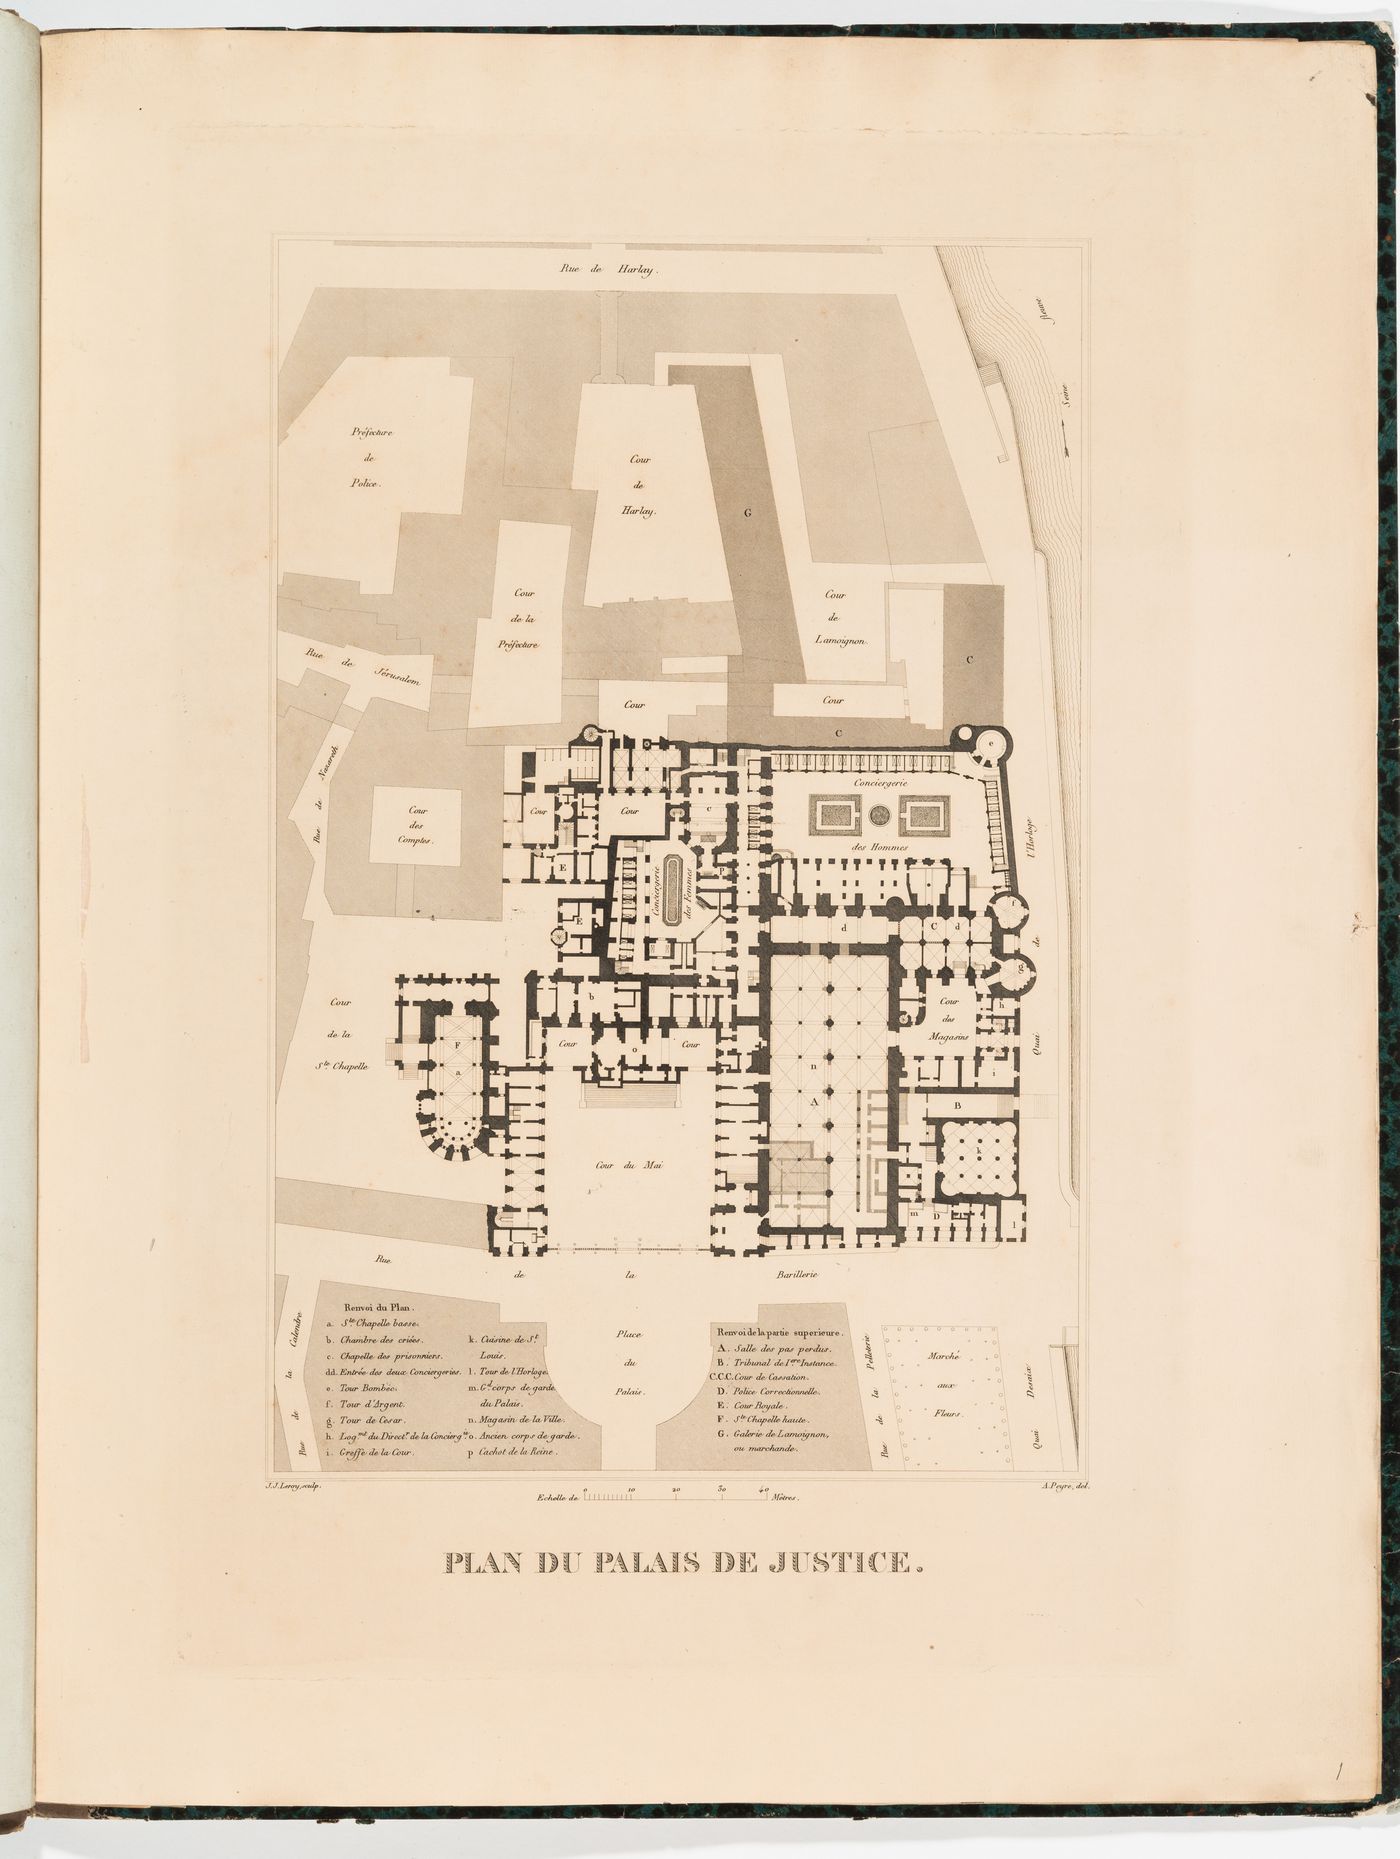 Project for alterations to the Palais de justice, Paris: Plan for the ground floor with a block plan of the adjacent buildings